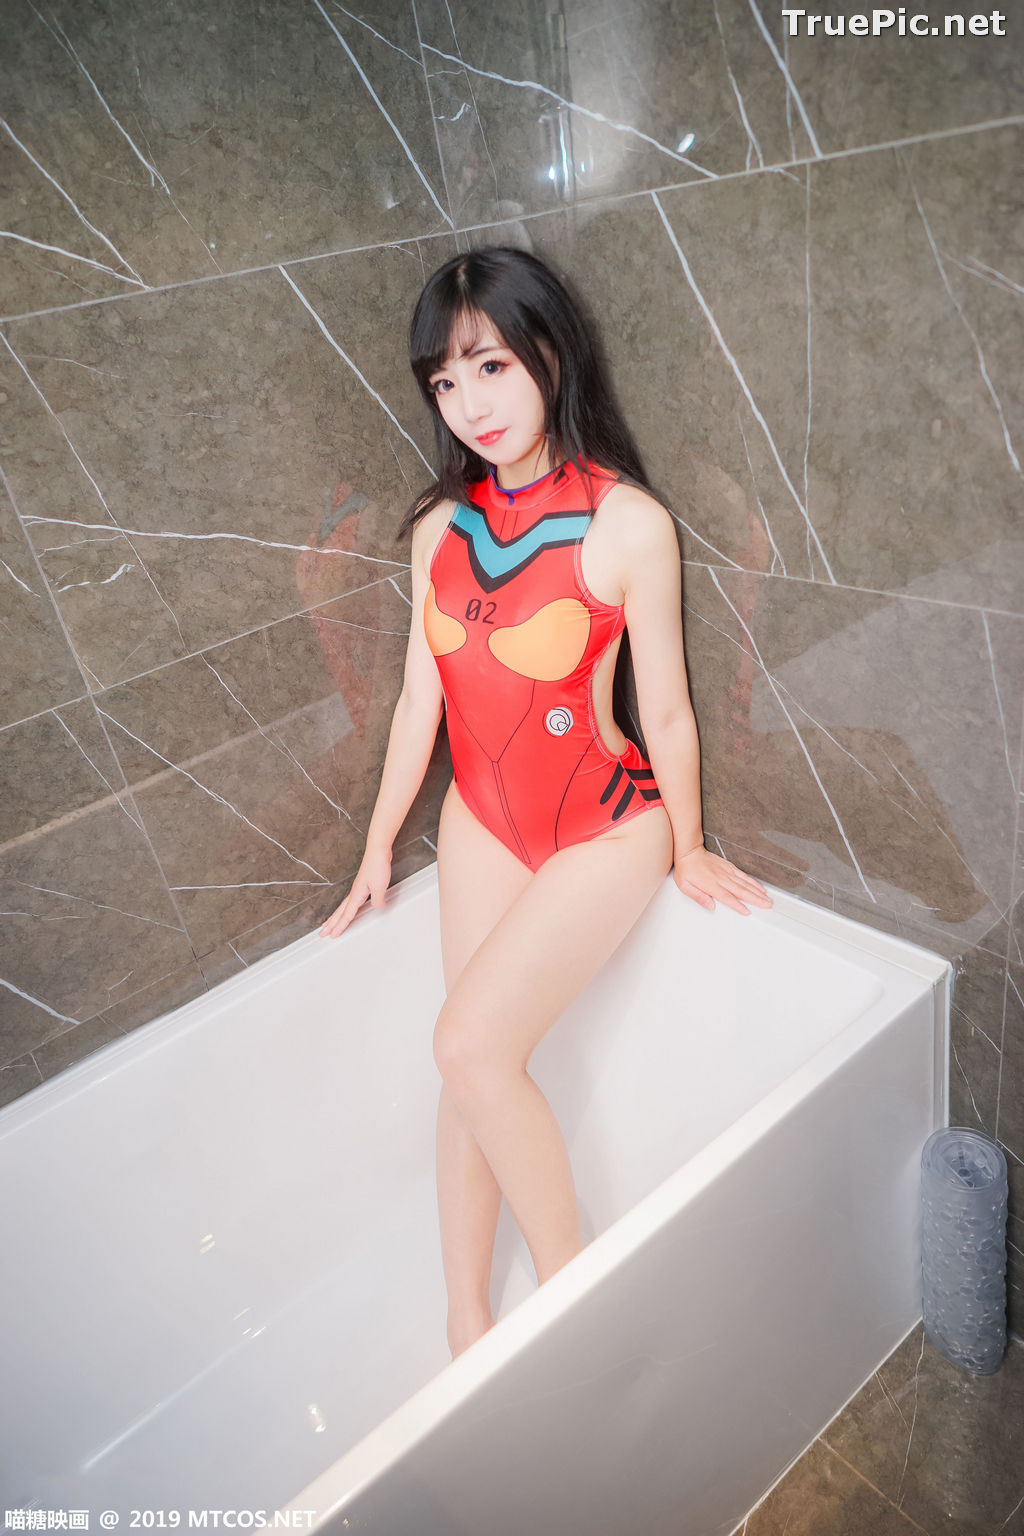 Image [MTCos] 喵糖映画 Vol.038 – Chinese Cute Model – Red Line Monokini - TruePic.net - Picture-12